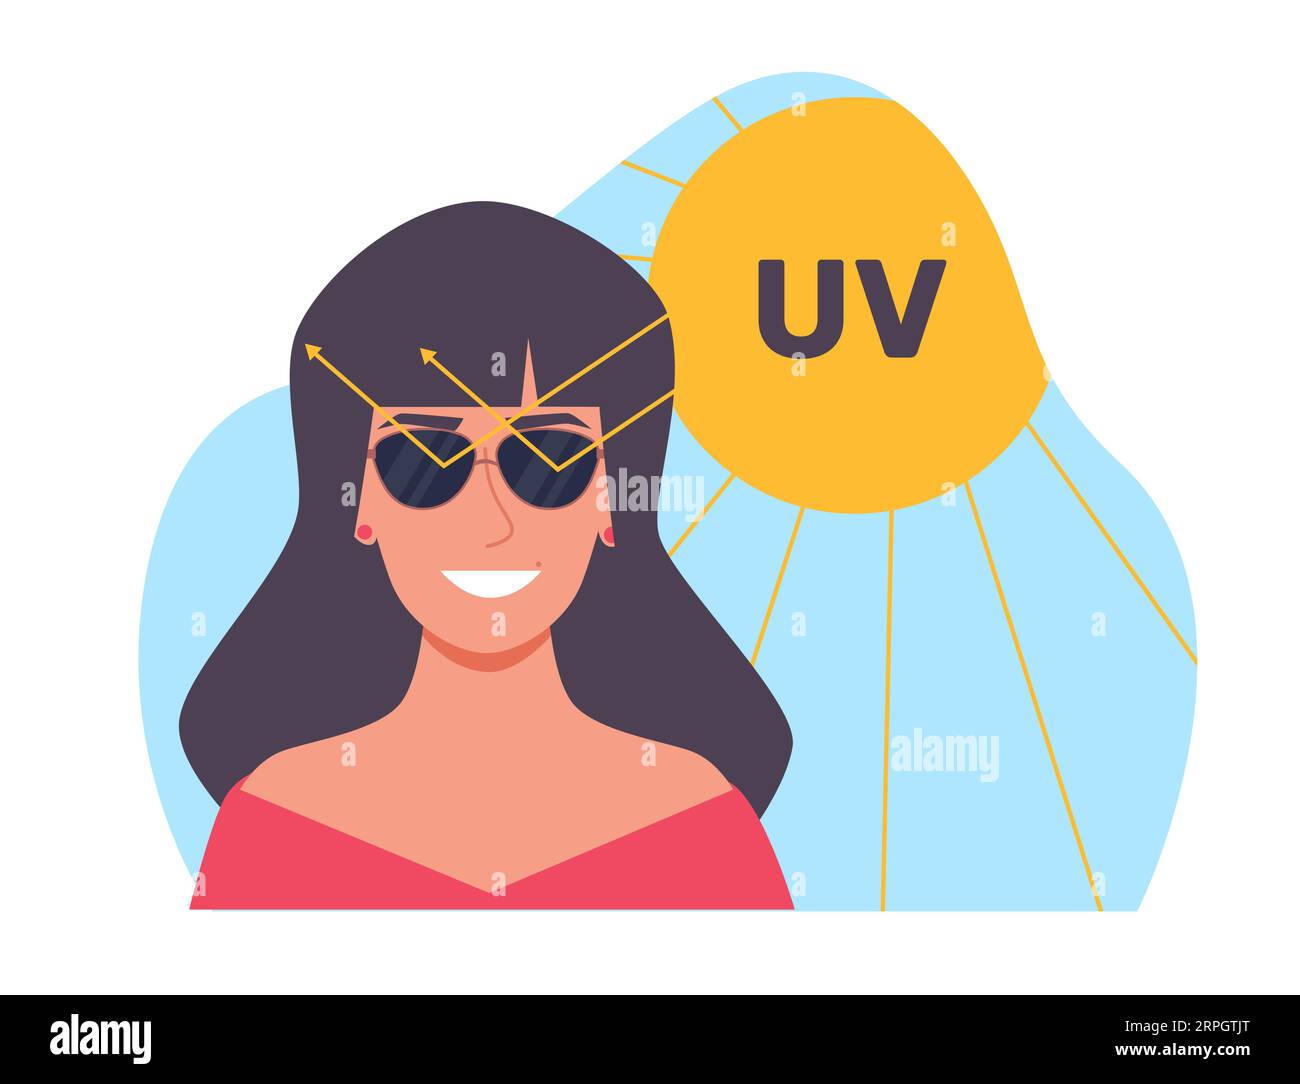 Sunglasses that block both uva and uvb rays Stock Vector Images - Alamy